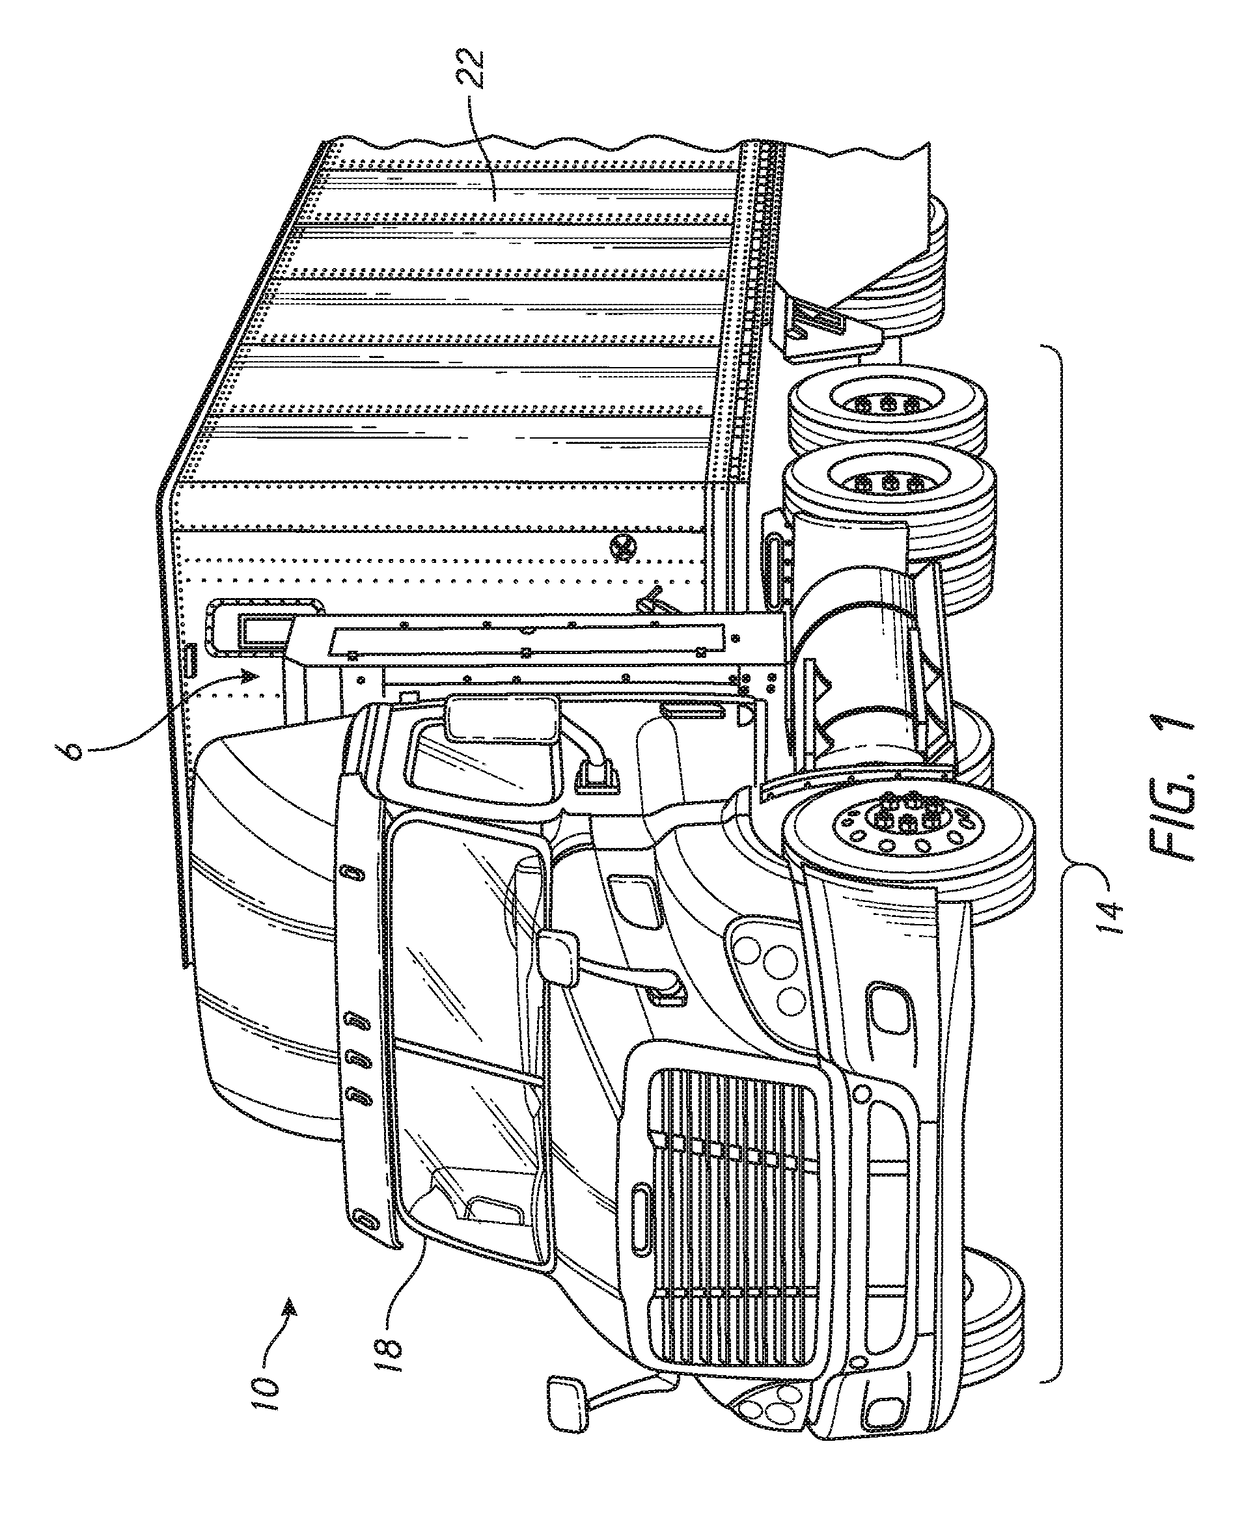 Back-of-cab fuel system and vehicle assemblies